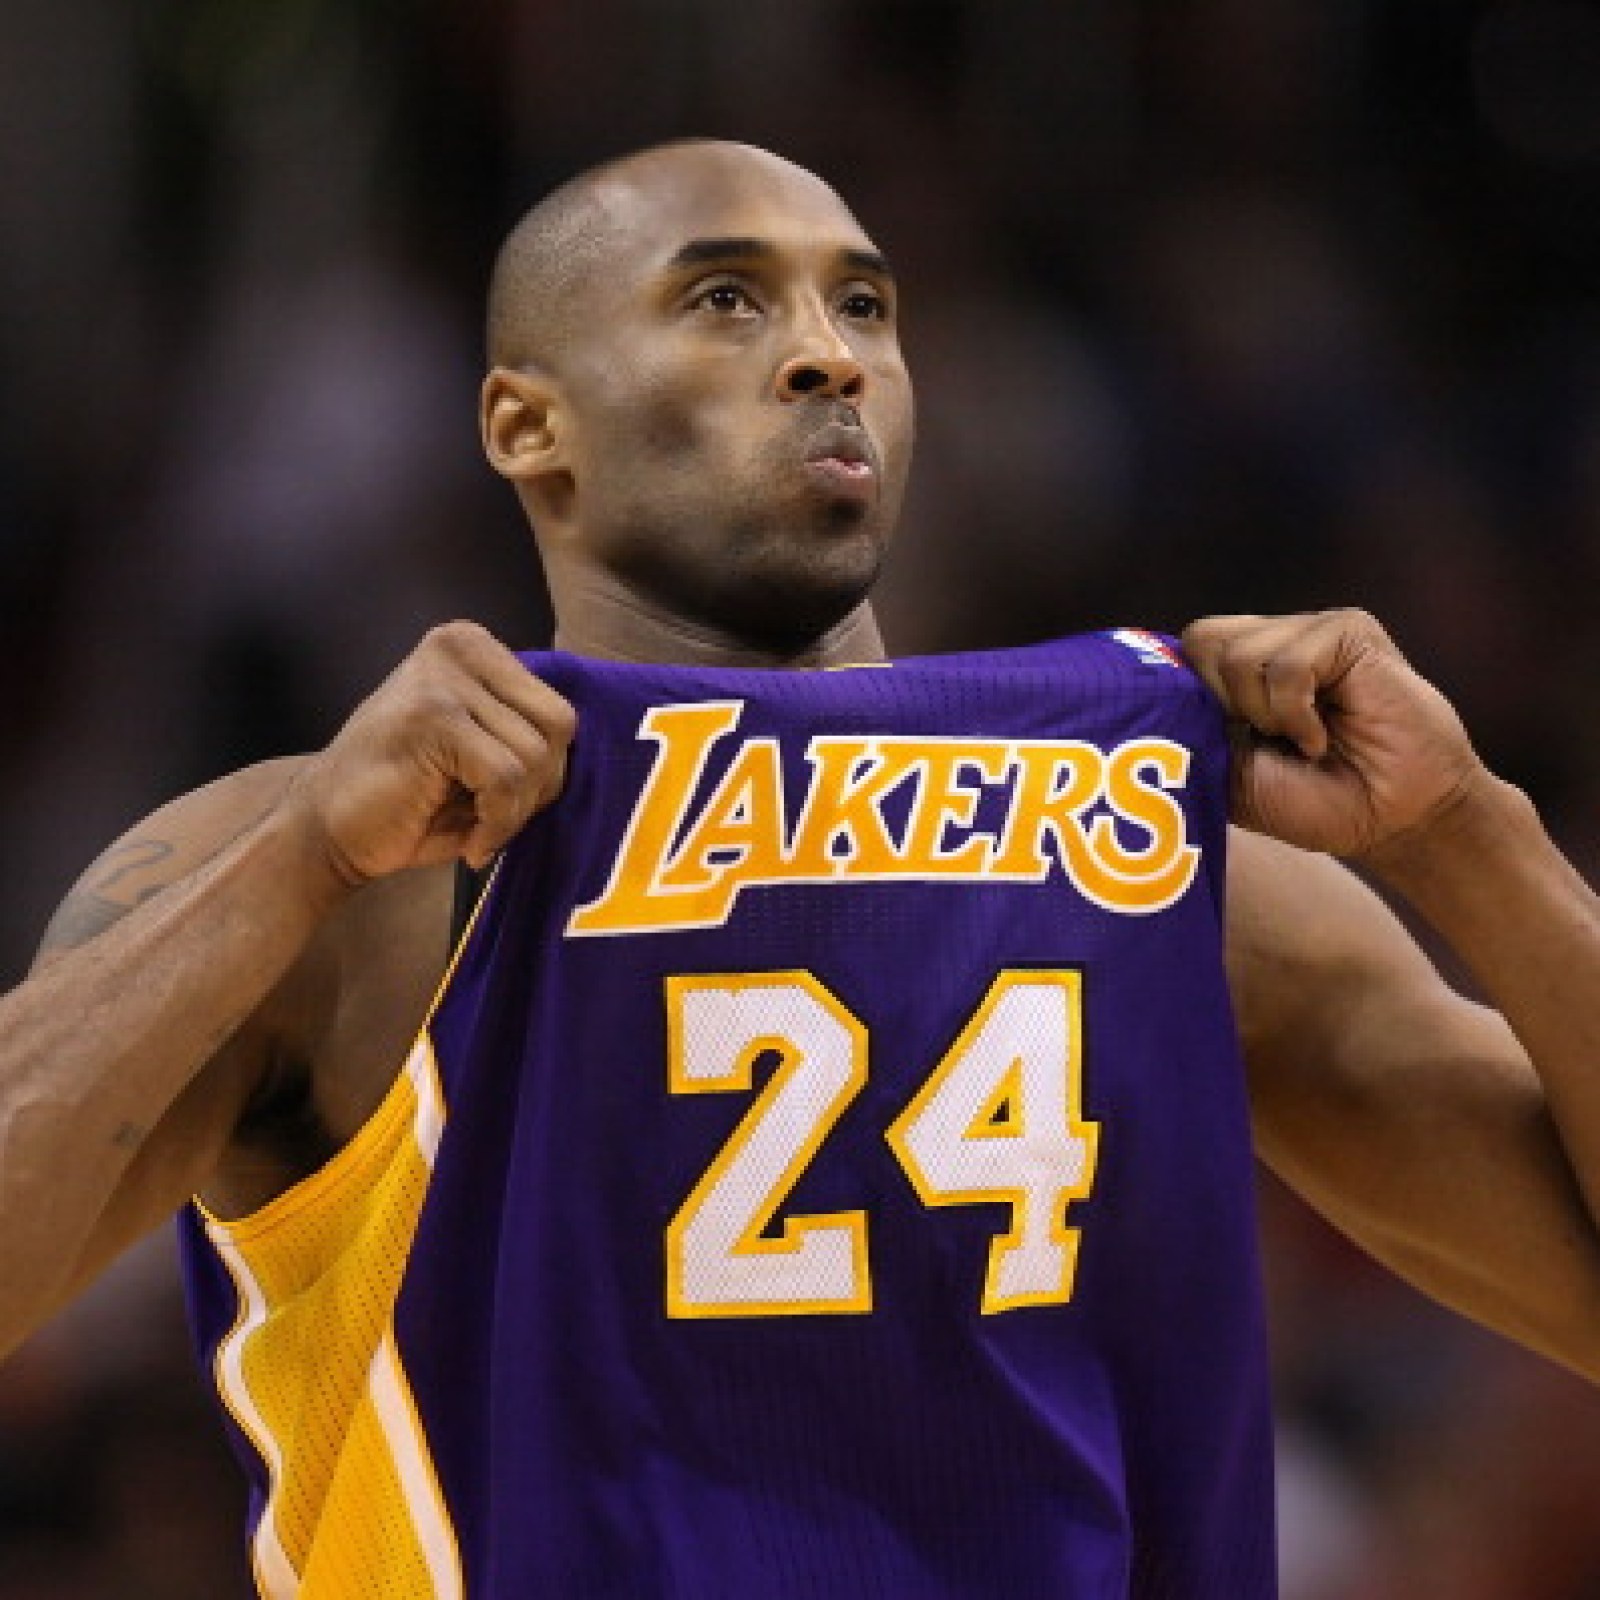 Kobe Bryant, Lakers shooting guard, stands ready to shoot a free